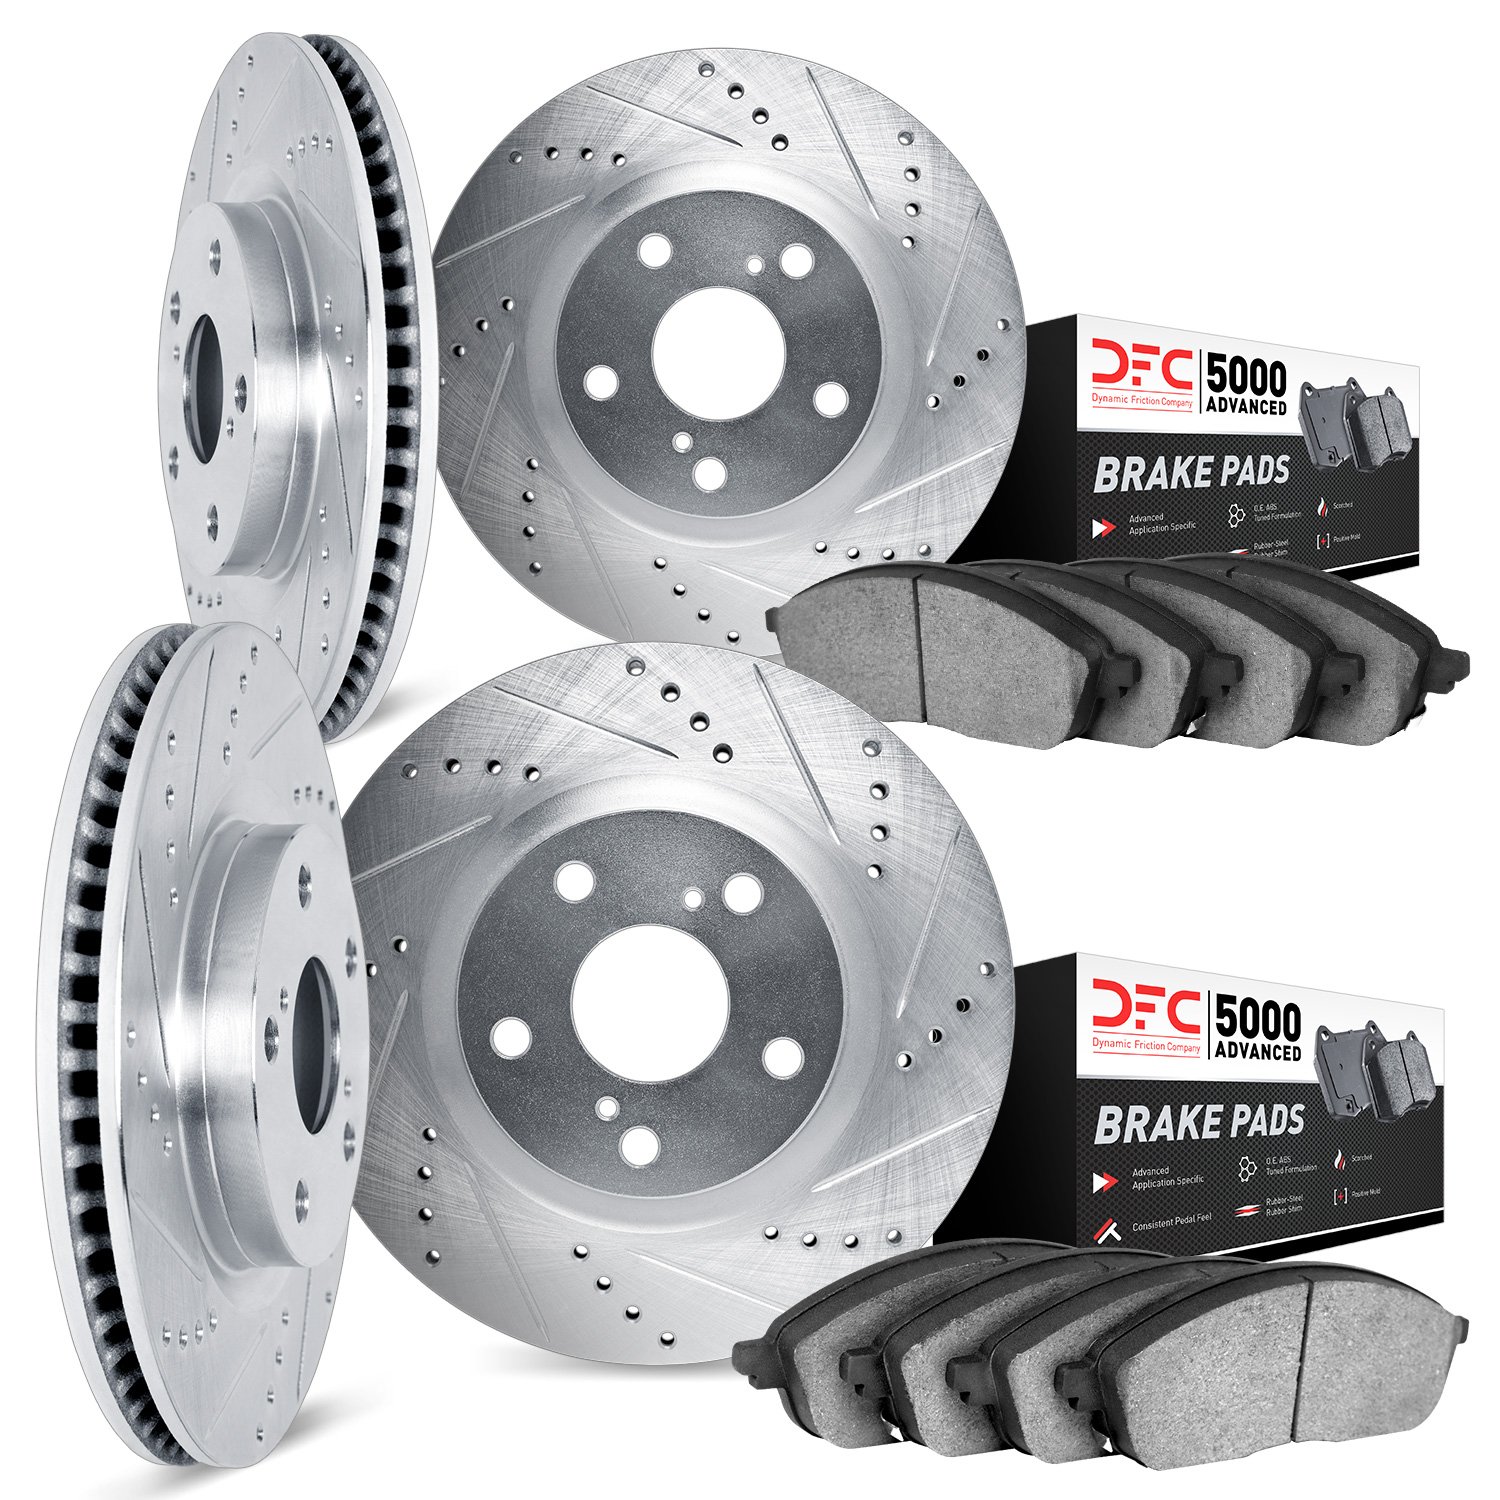 7504-68010 Drilled/Slotted Brake Rotors w/5000 Advanced Brake Pads Kit [Silver], Fits Select Infiniti/Nissan, Position: Front an